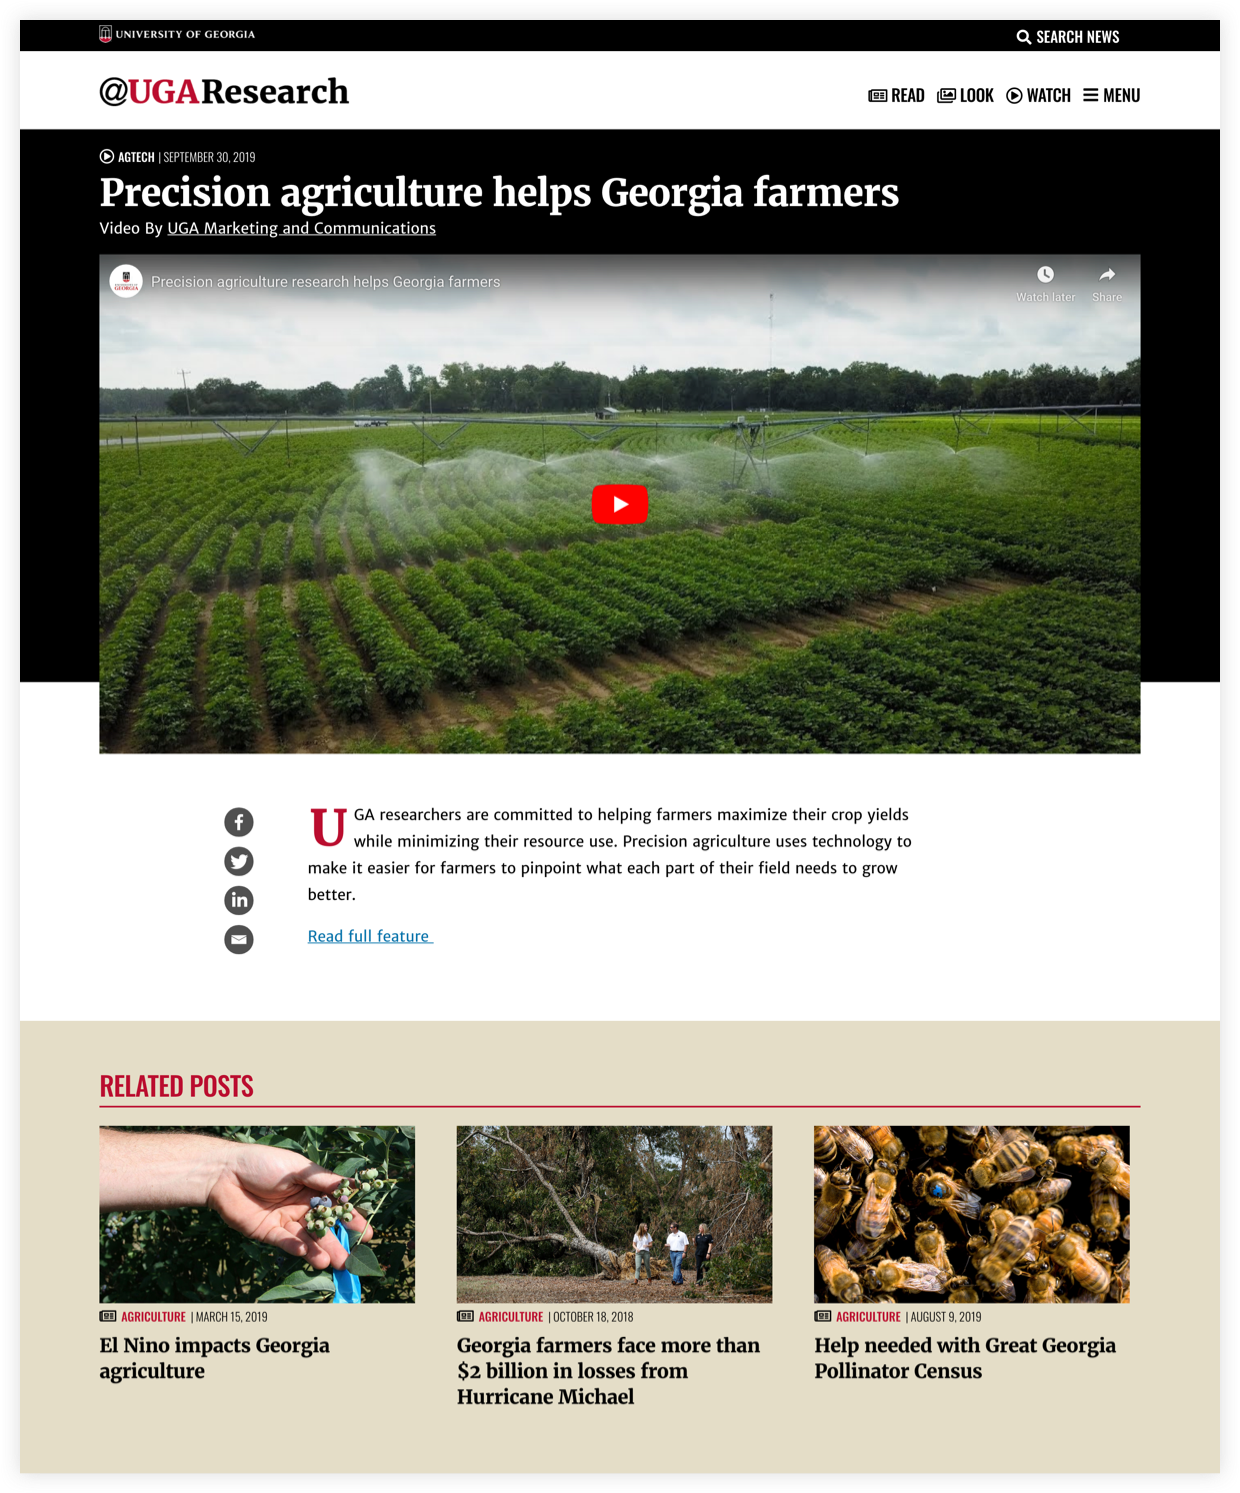 UGA Research News WATCH page with featured video posts and latest video posts